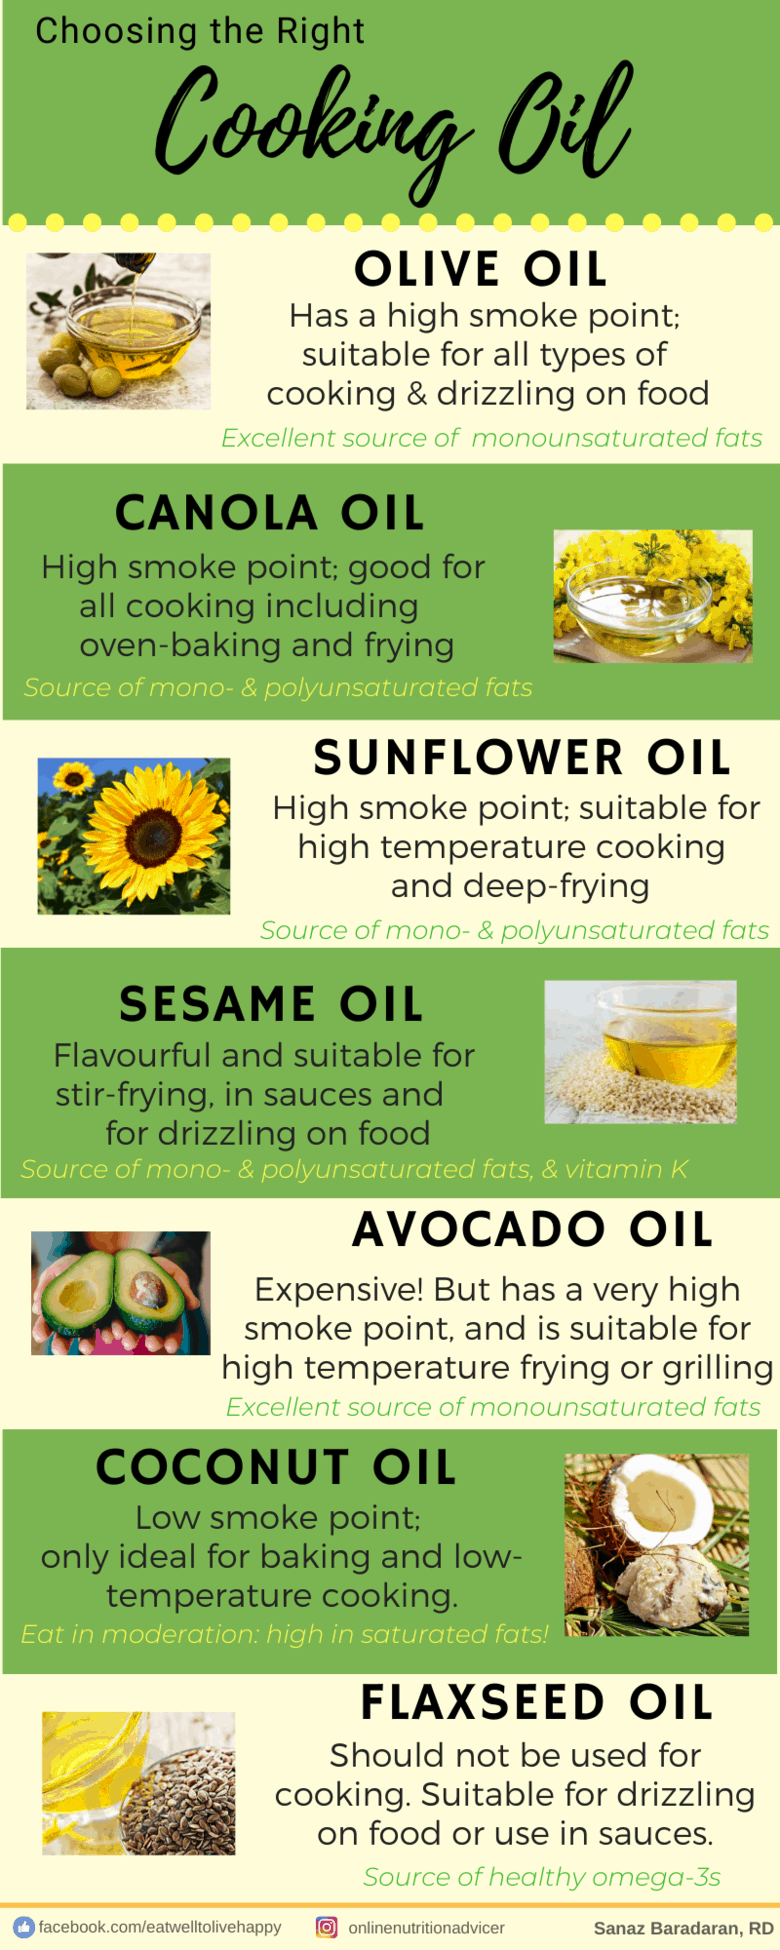 Choosing the Safest Cooking Oils for Your Health